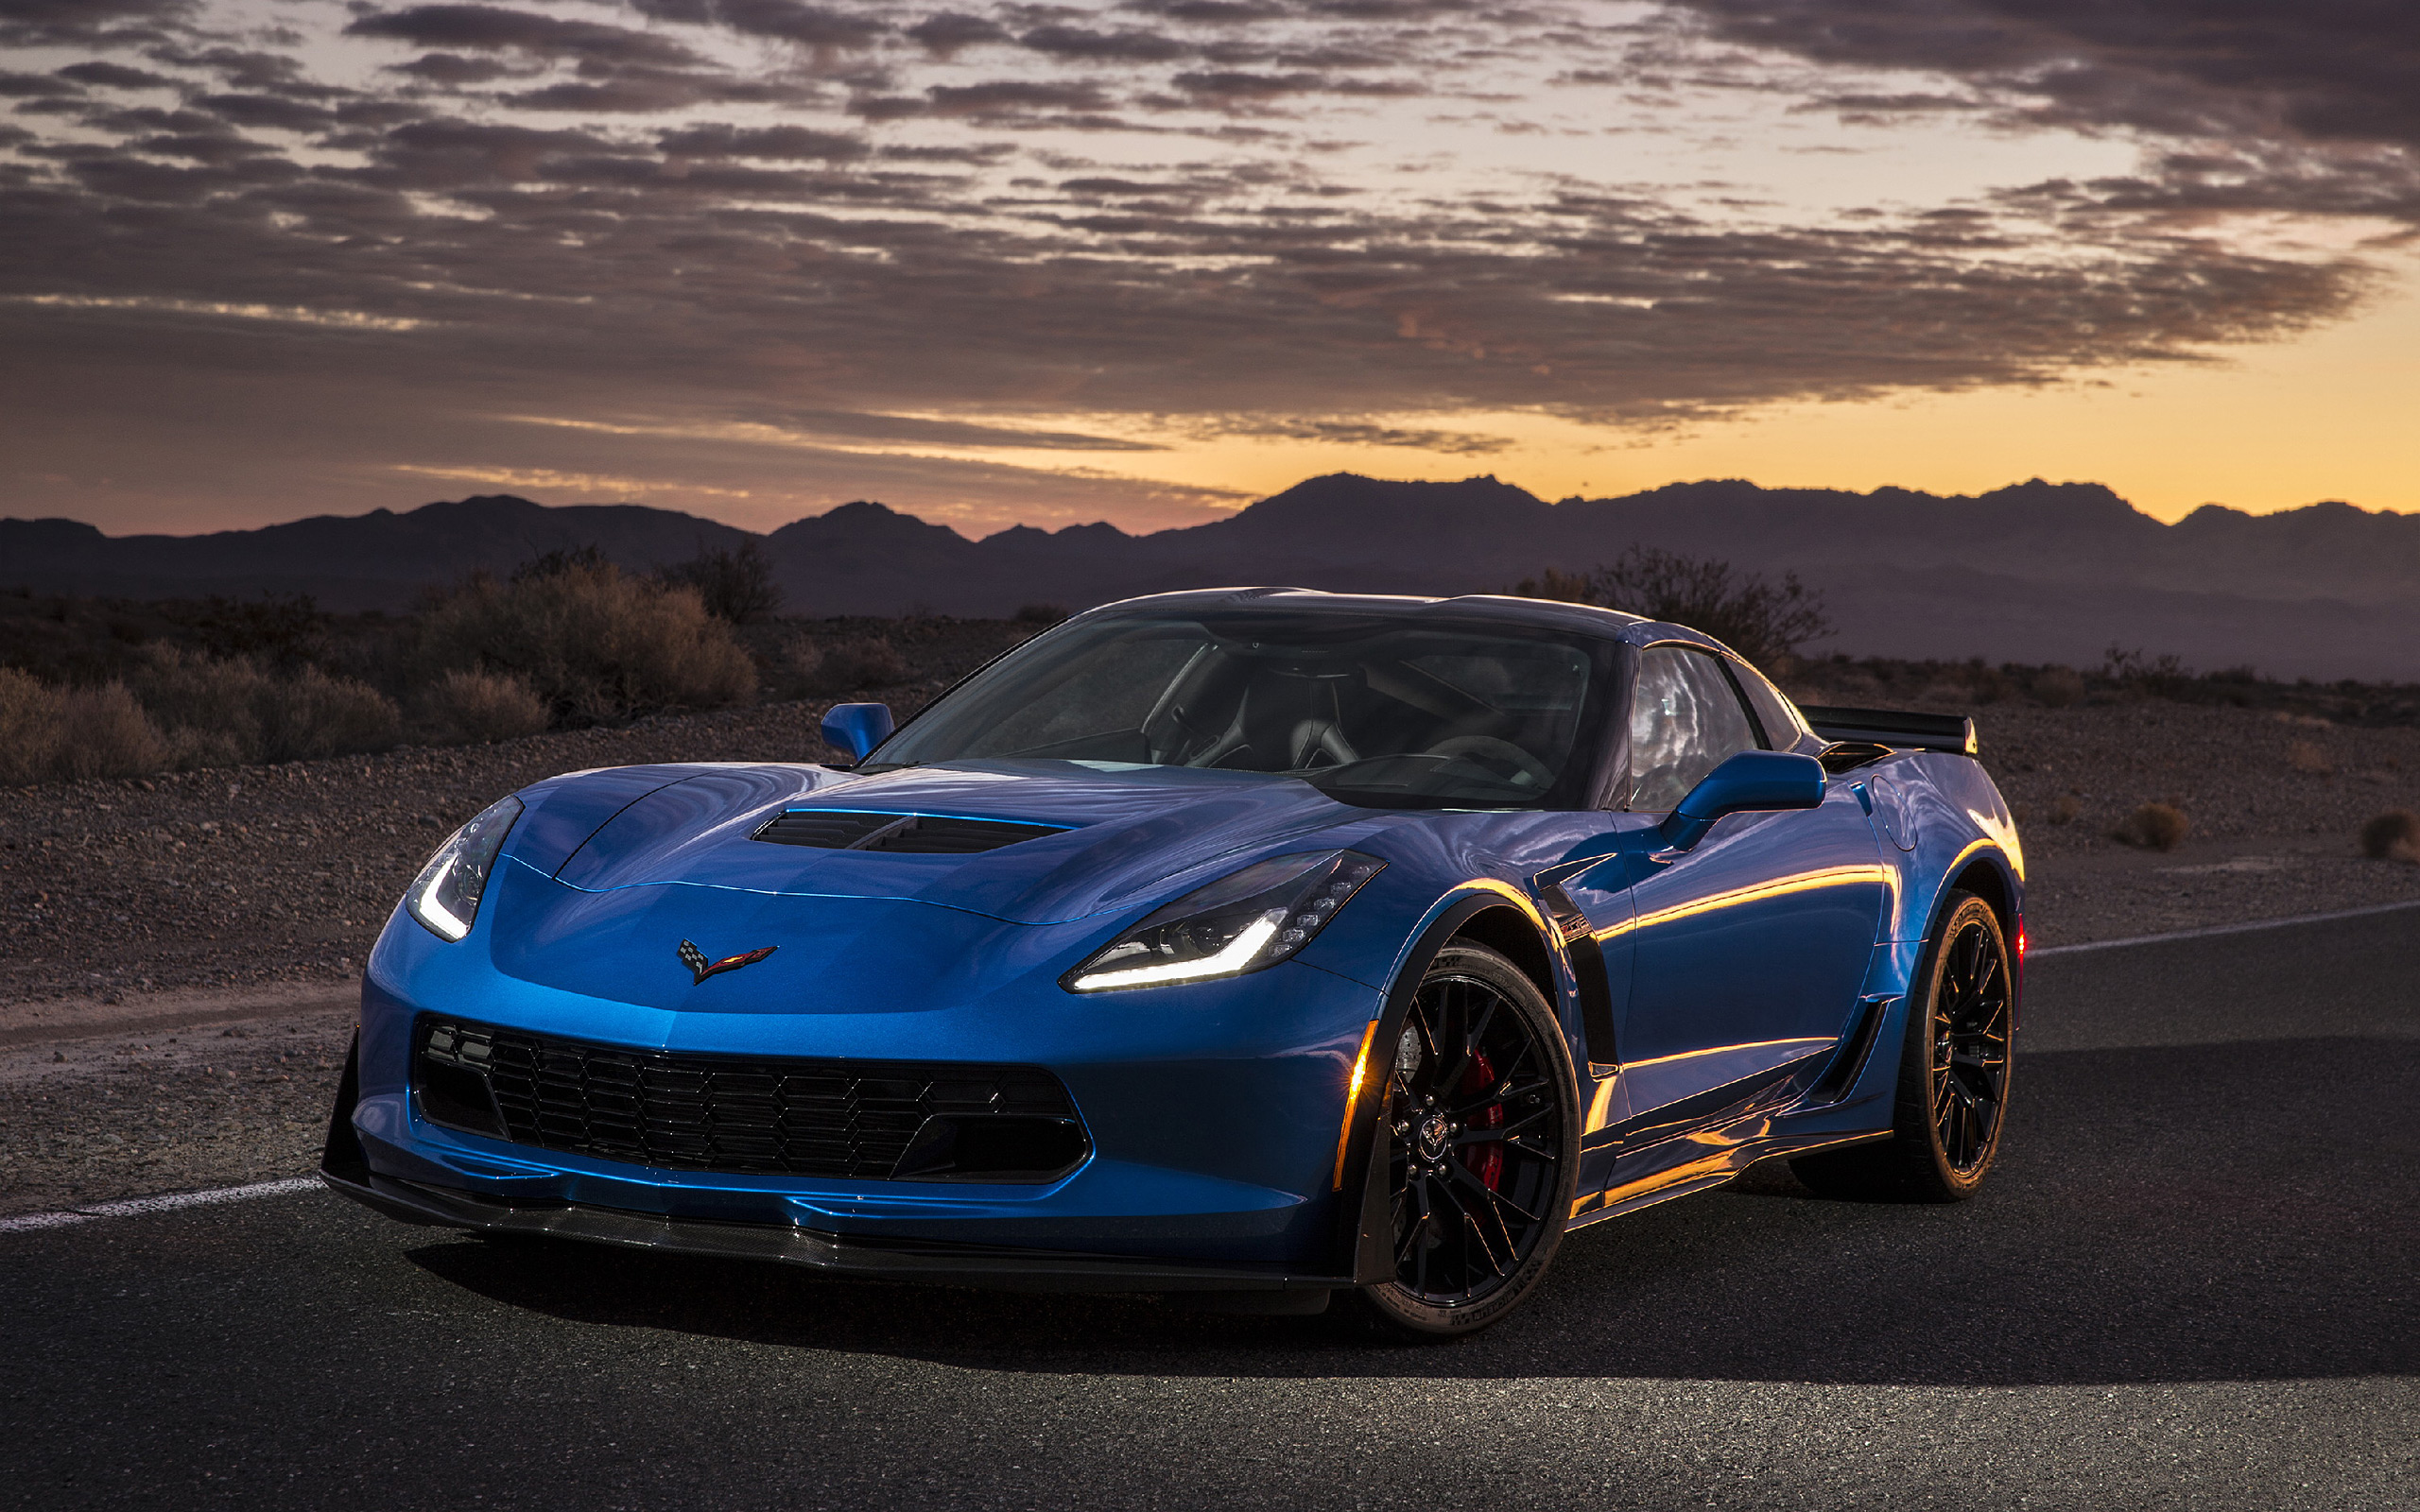 Chevrolet Corvette Z06 HD Wallpapers and Backgrounds. 